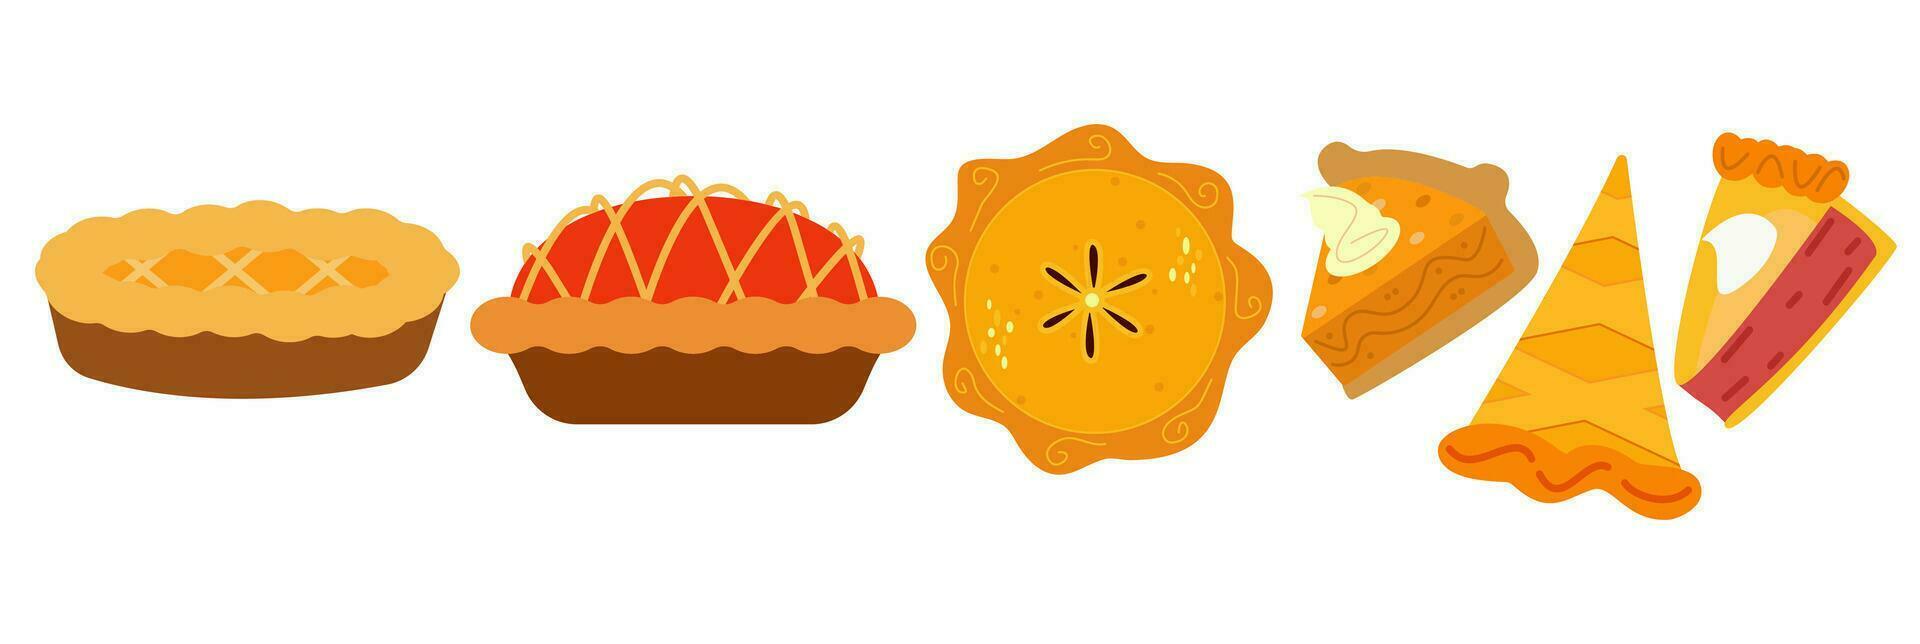 Pies Vector Illustration.Thanksgiving and Holiday Pumpkin Pie.